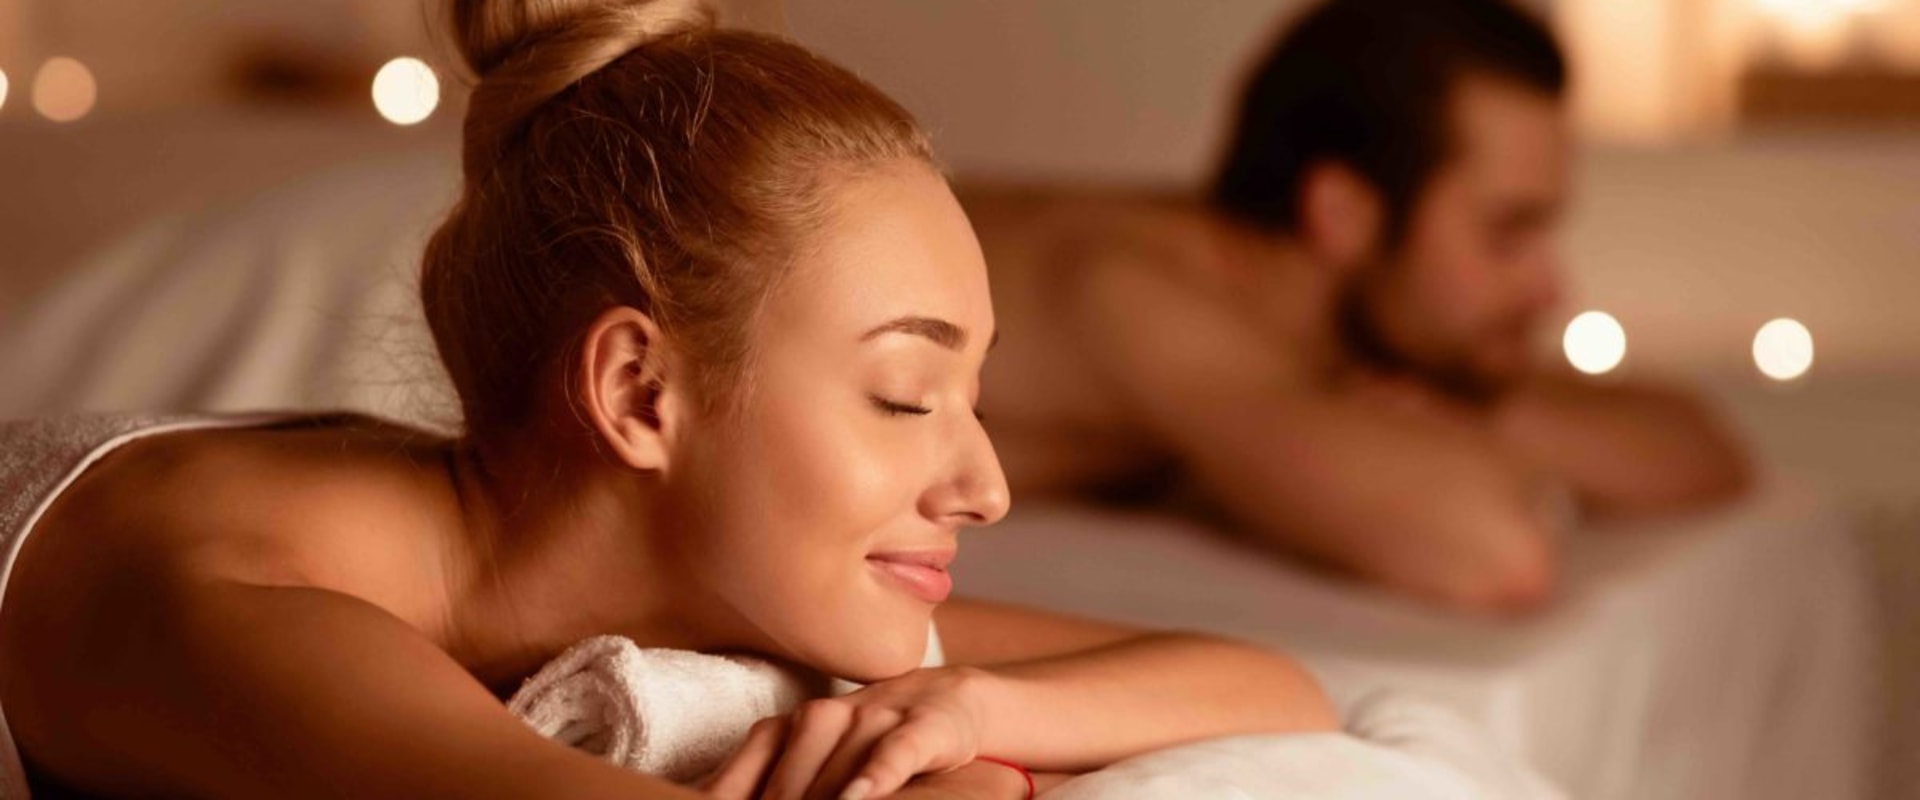 Everything You Need to Know About Couples Massages